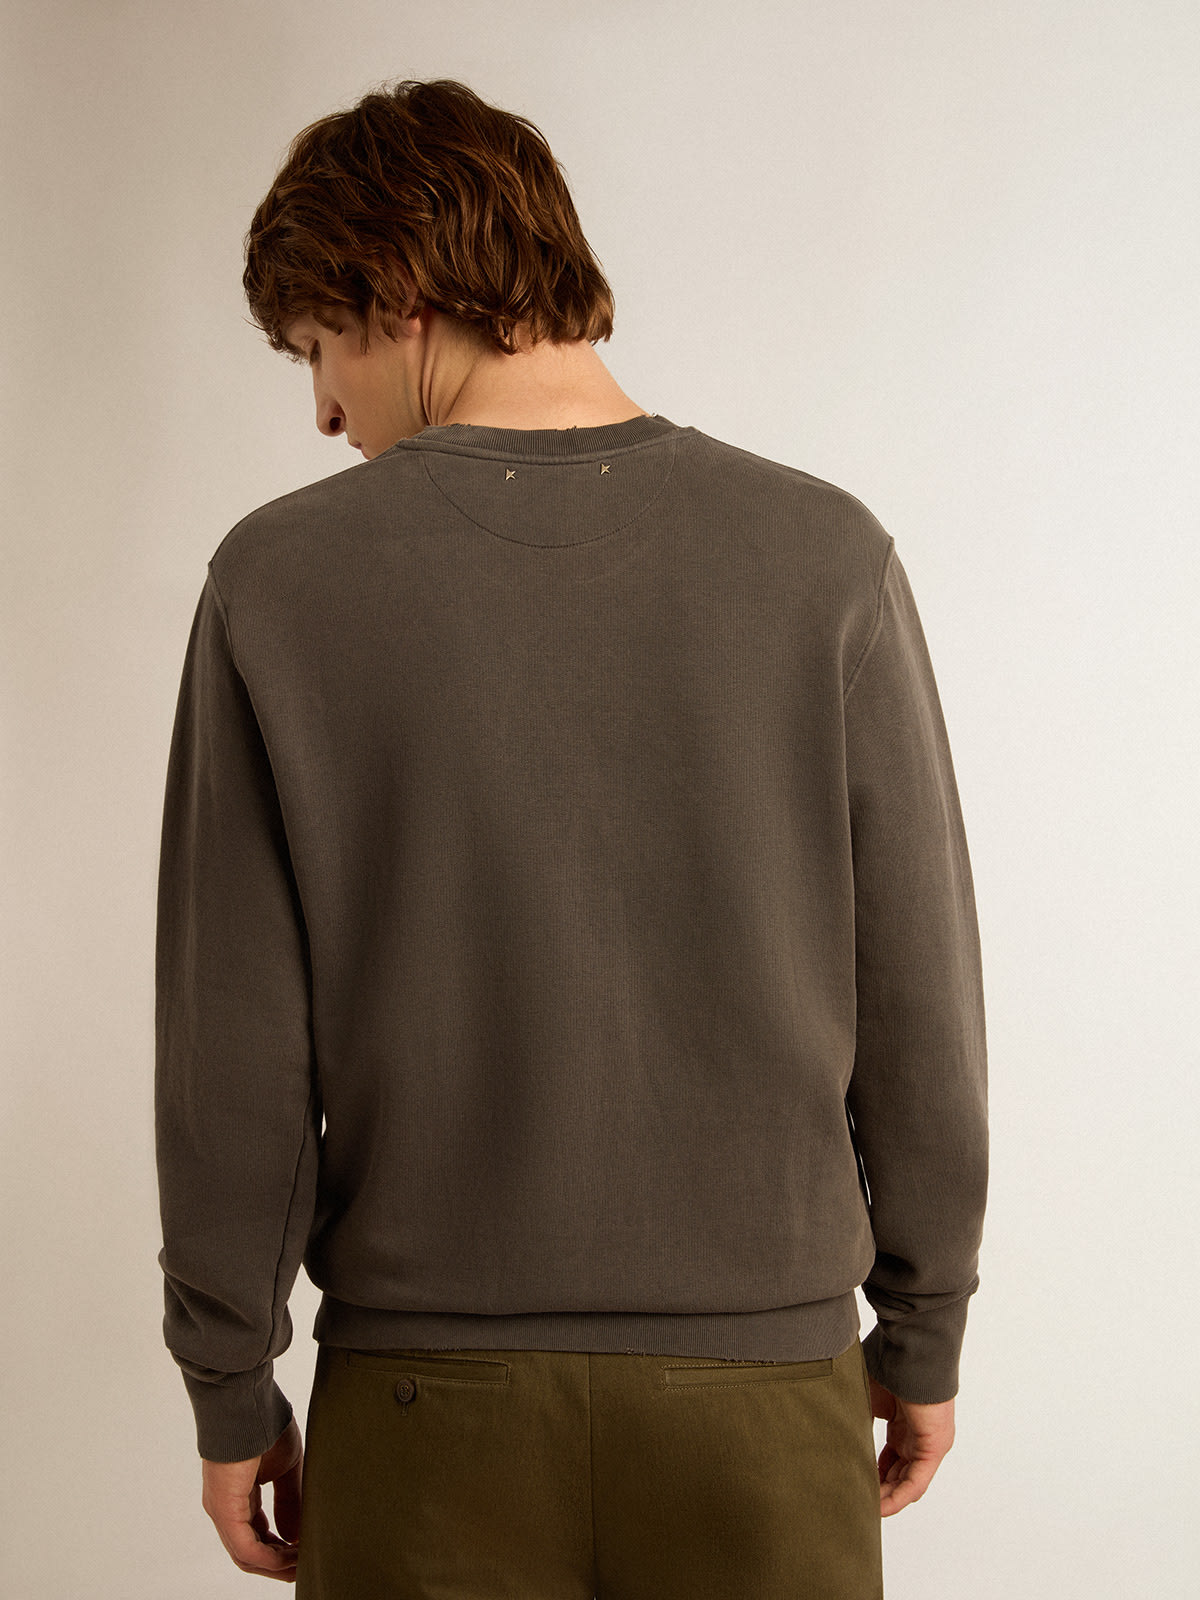 Golden Goose - Men's gray sweatshirt with logo and distressed treatment in 